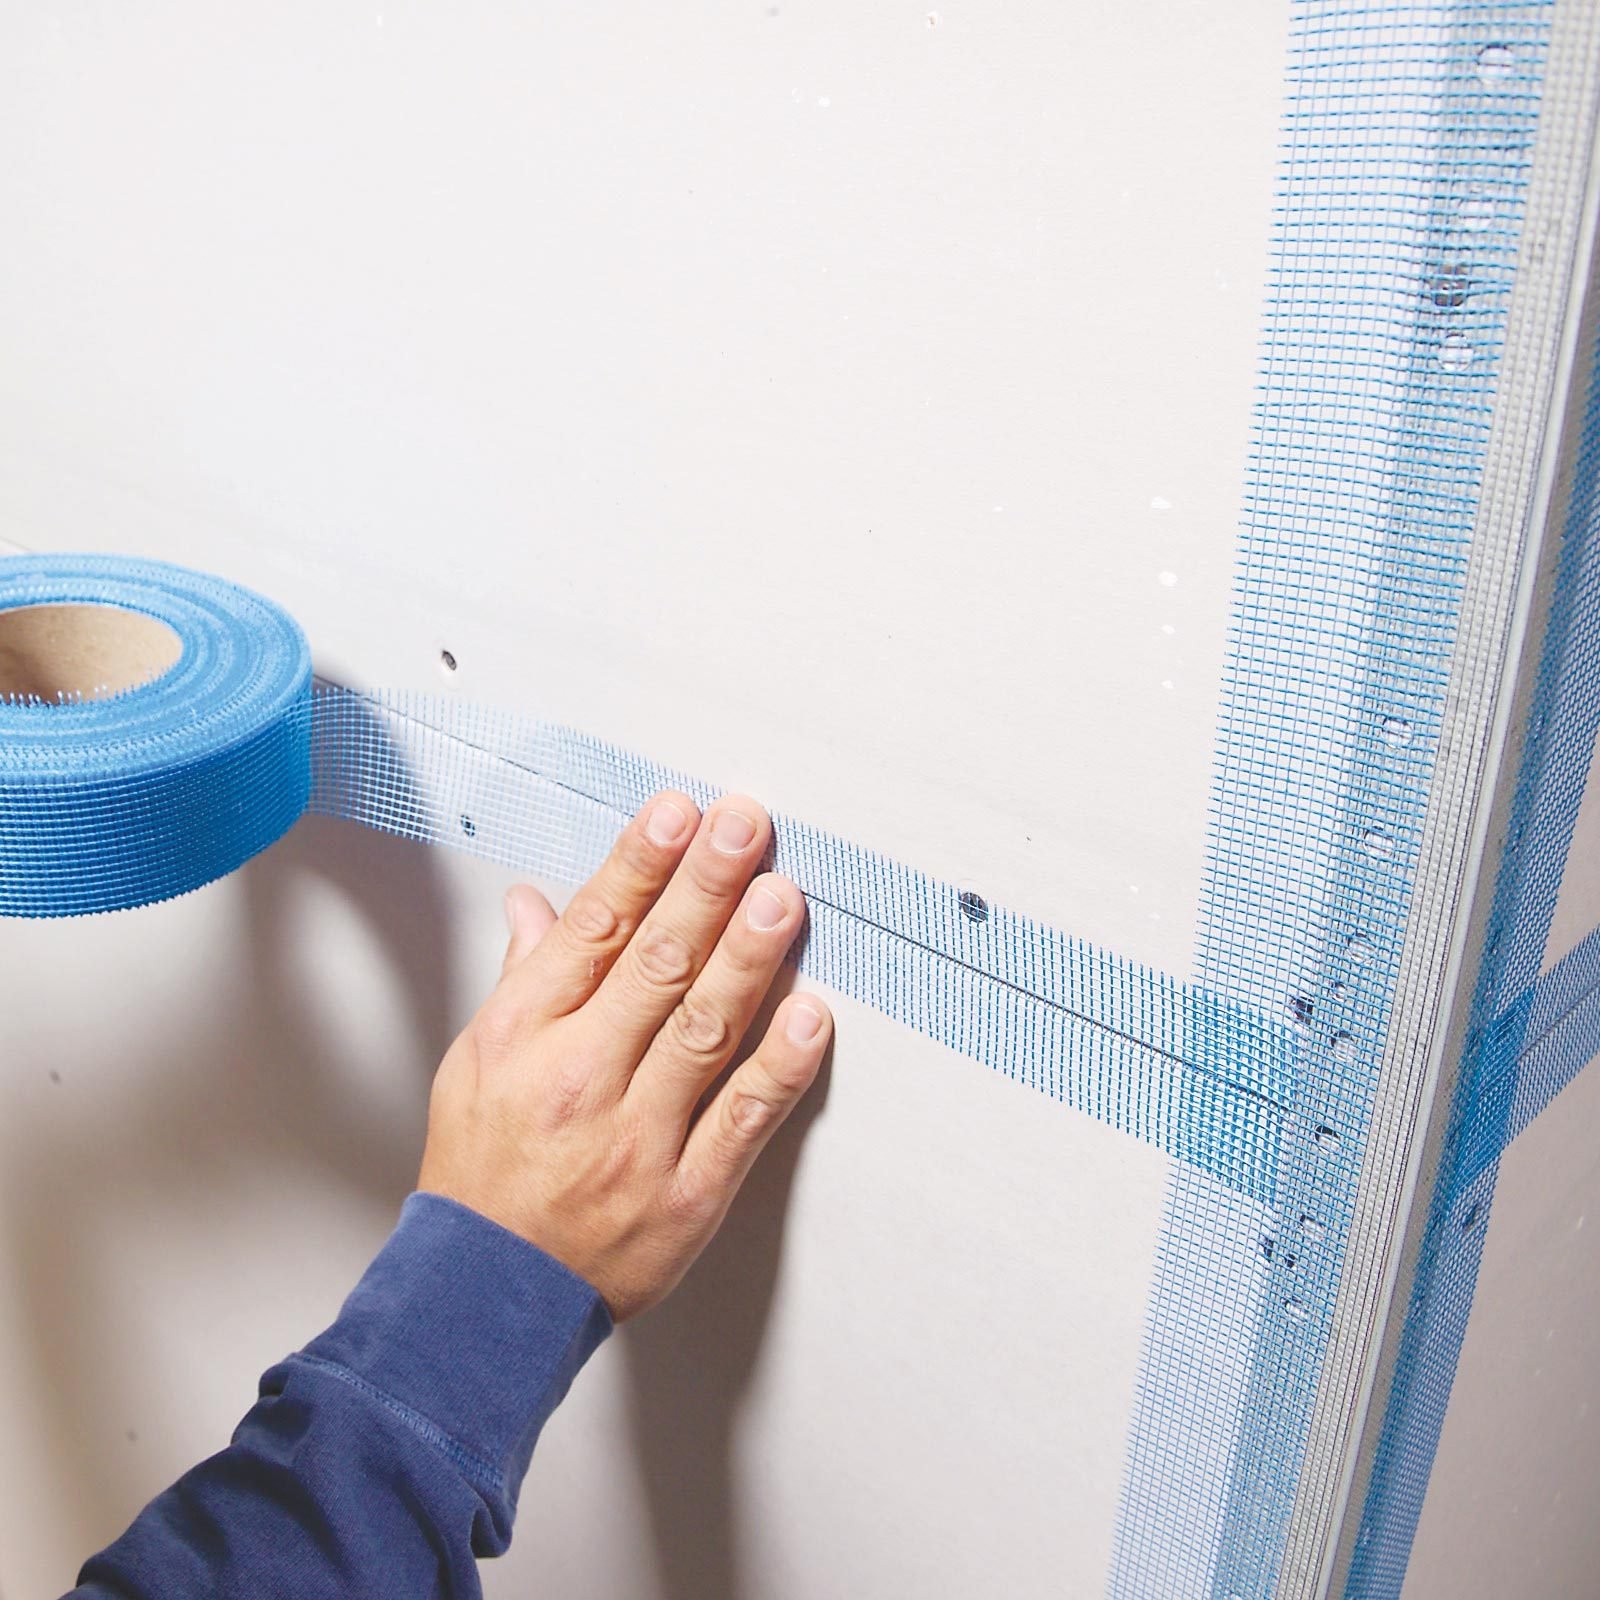 10 Tips for Better Drywall Taping